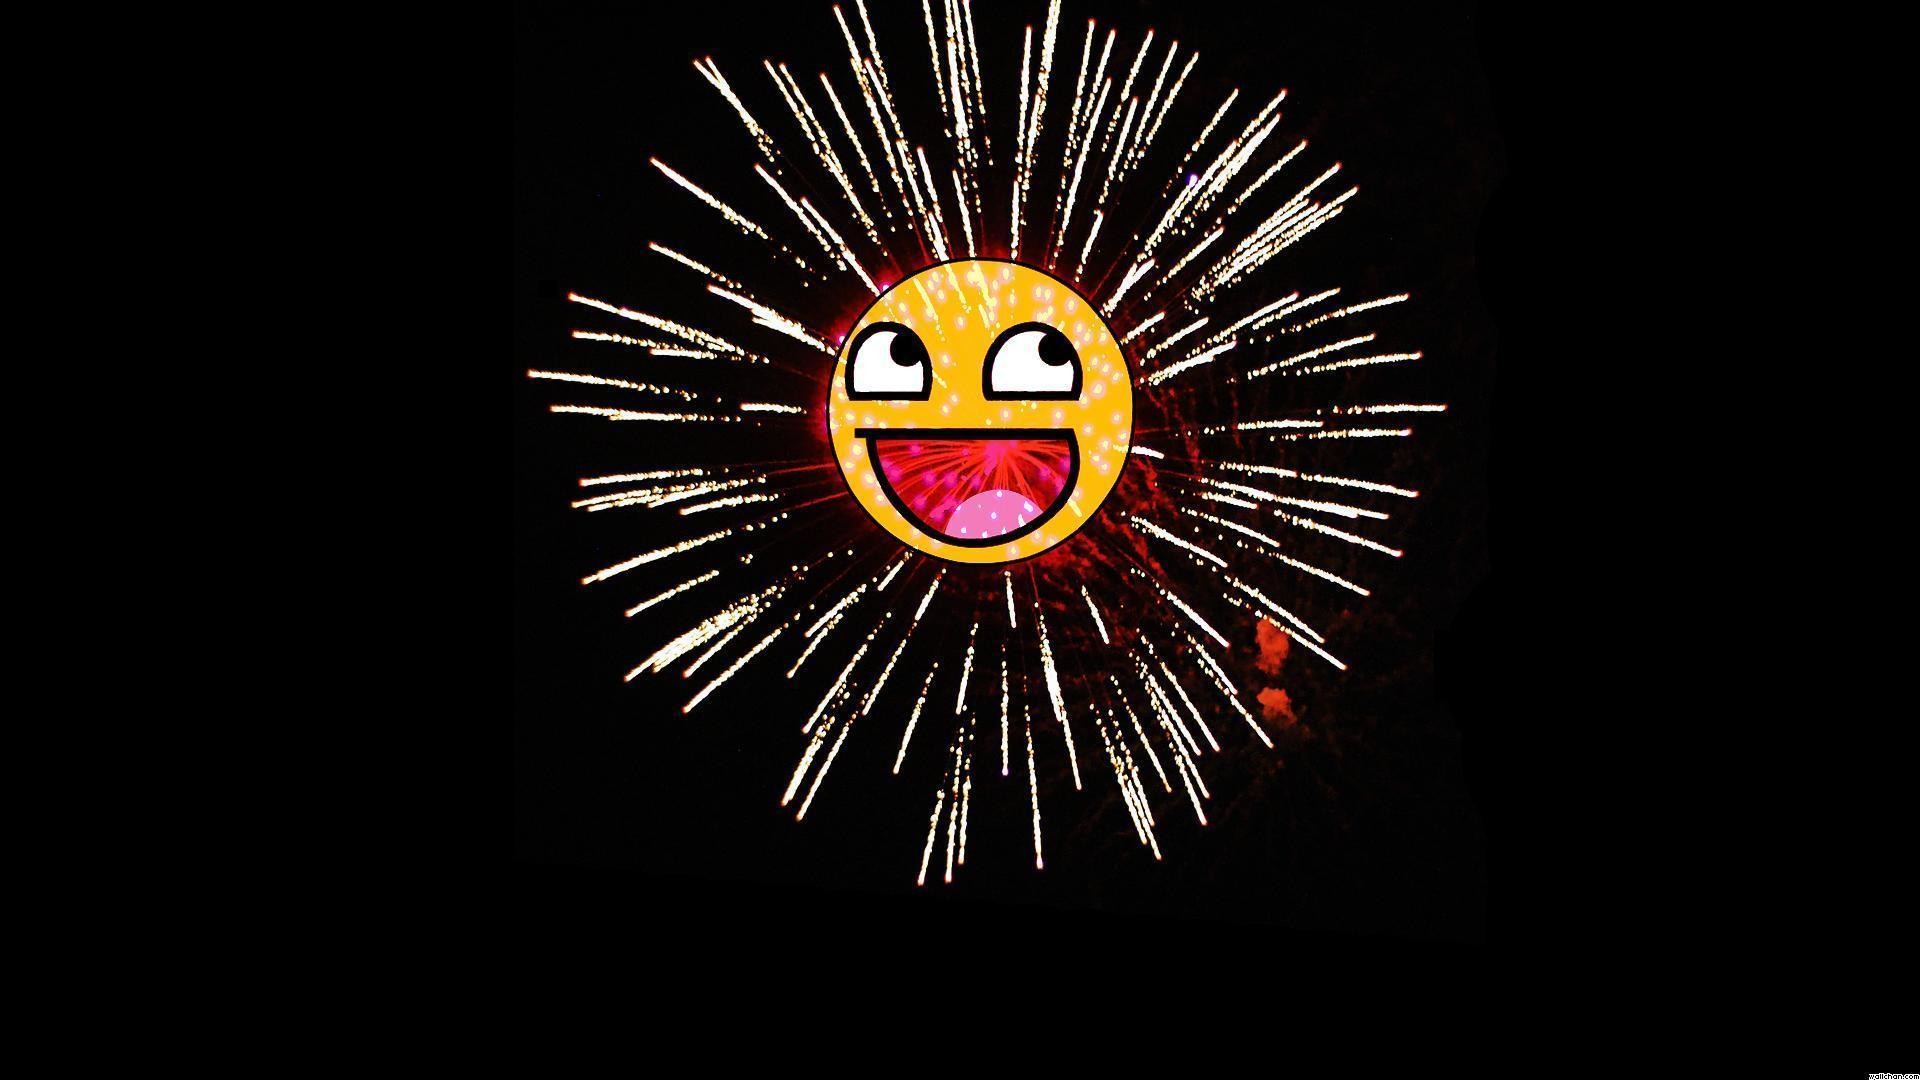 Awesome Face Fireworks Fire Cracker,Fireworks hd Wallpaper For